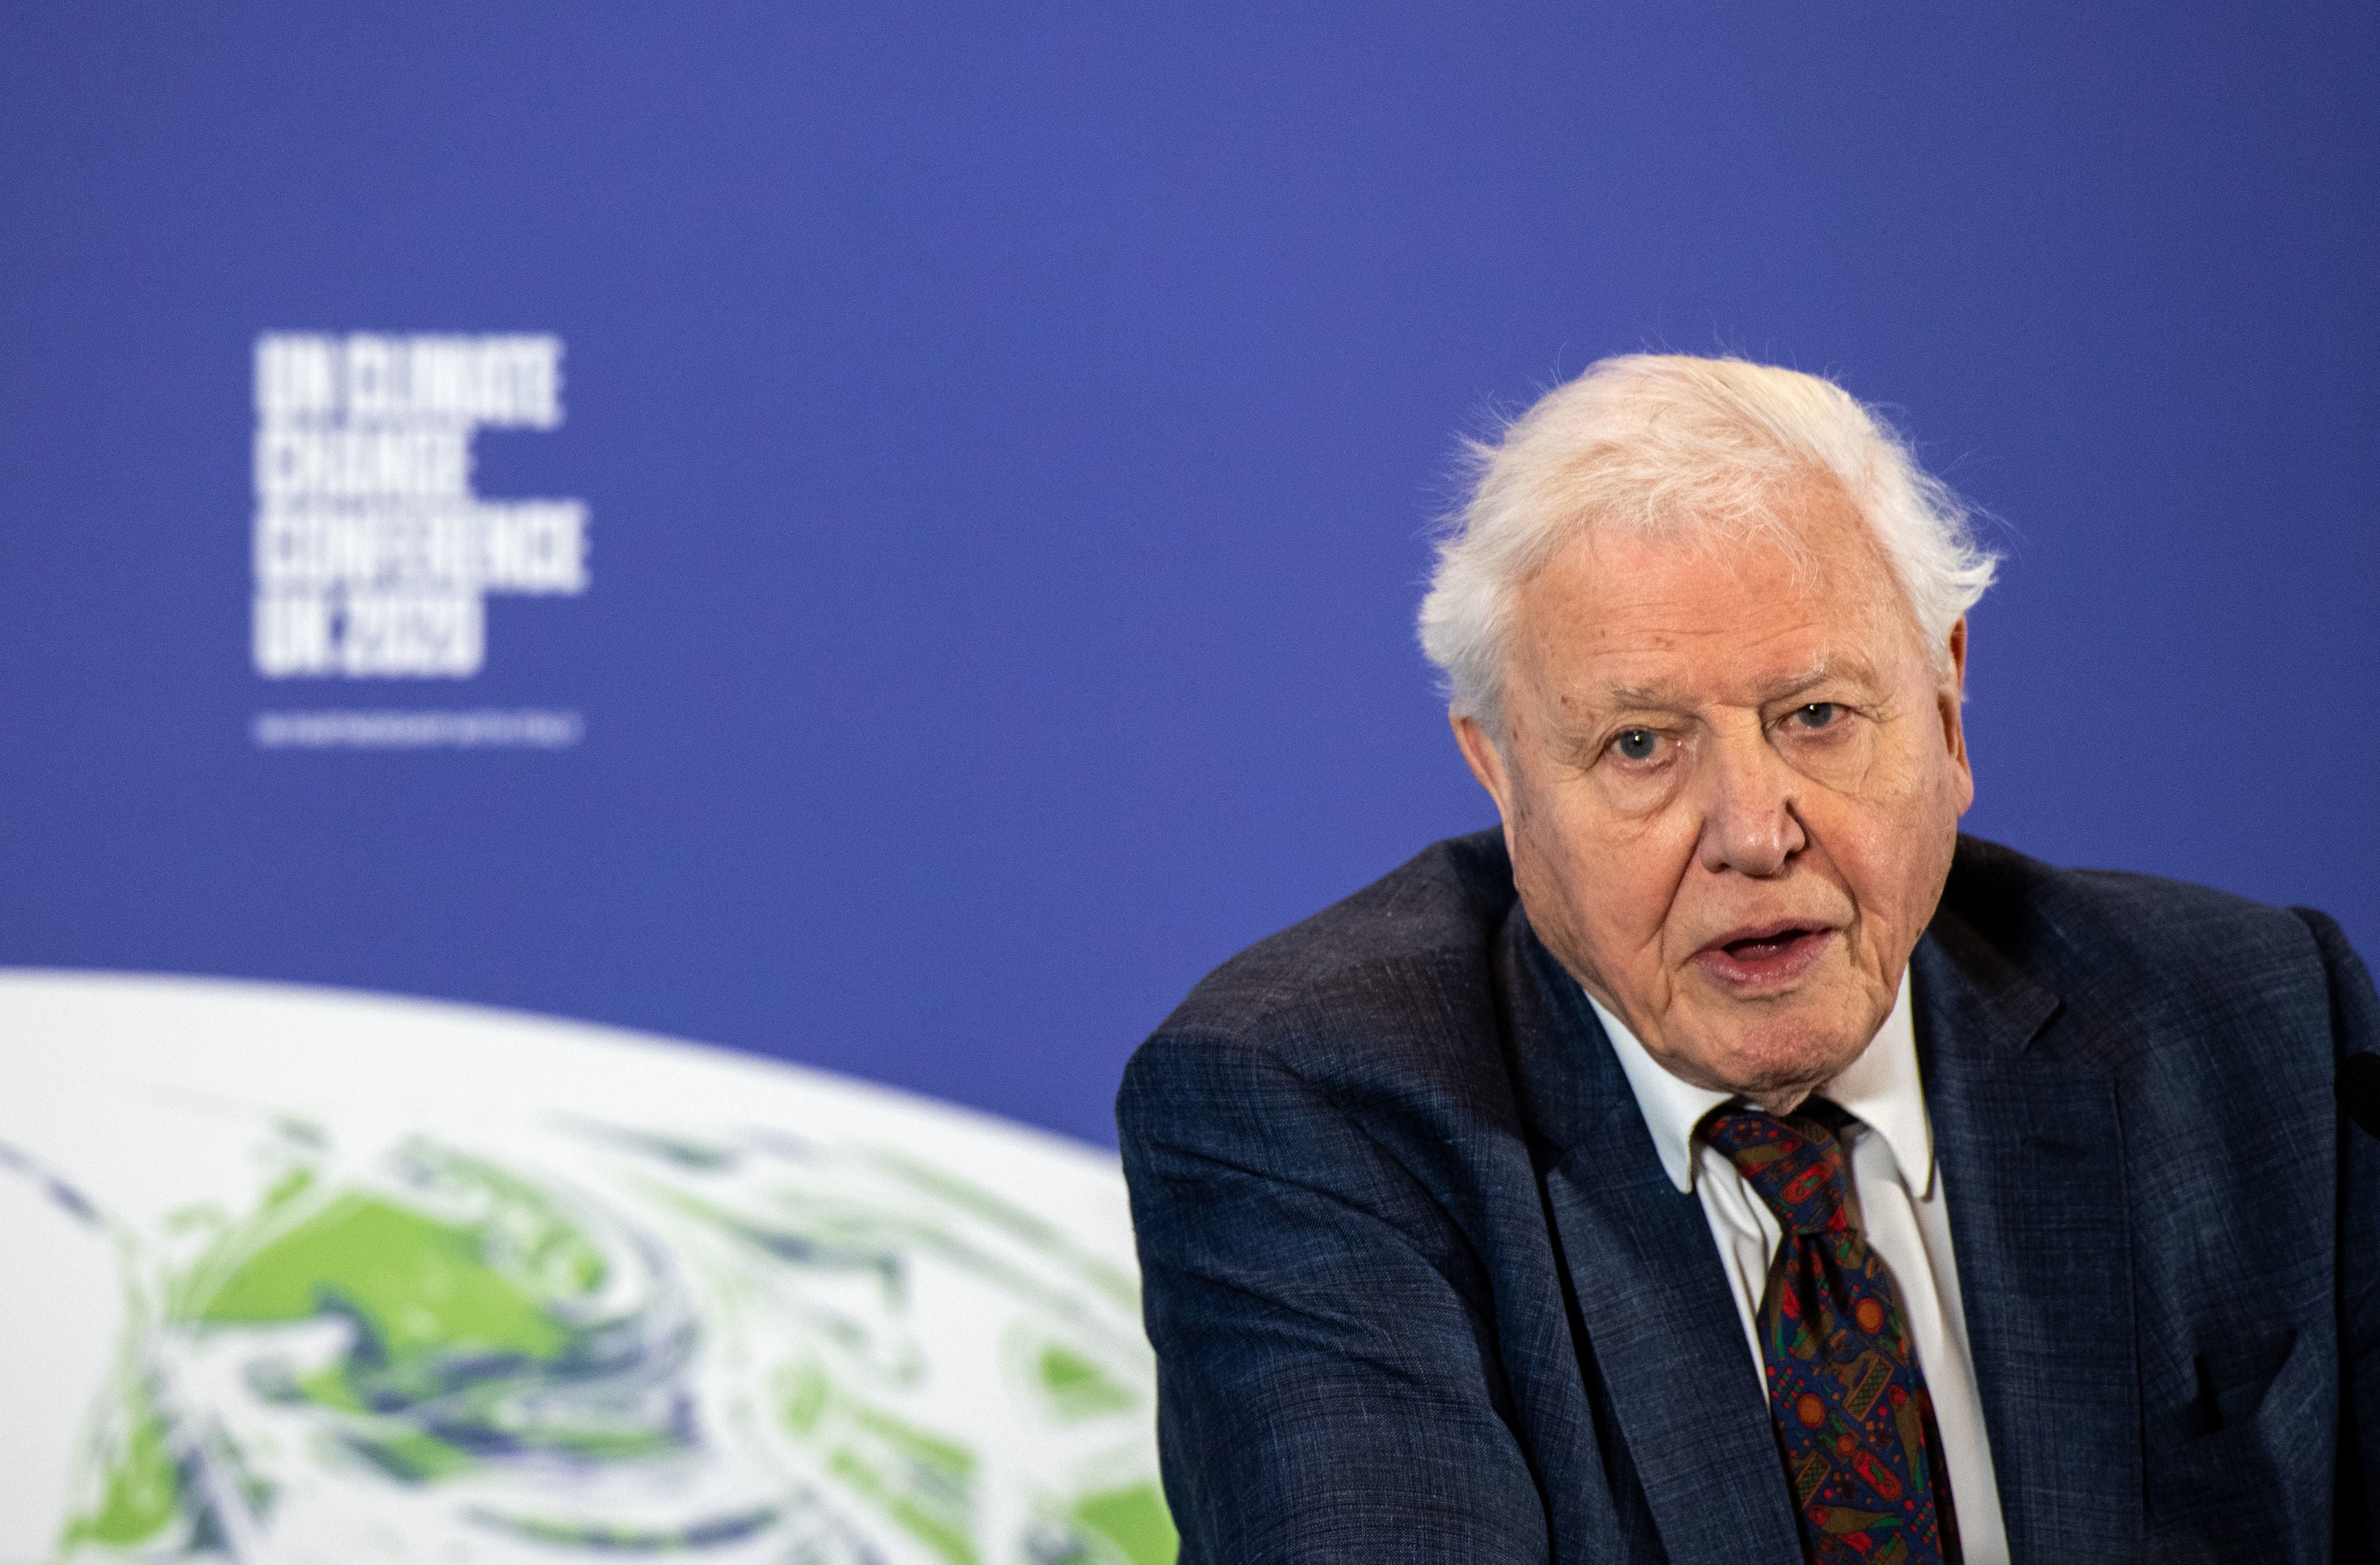 David Attenborough addressed Climate Assembly UK earlier this year